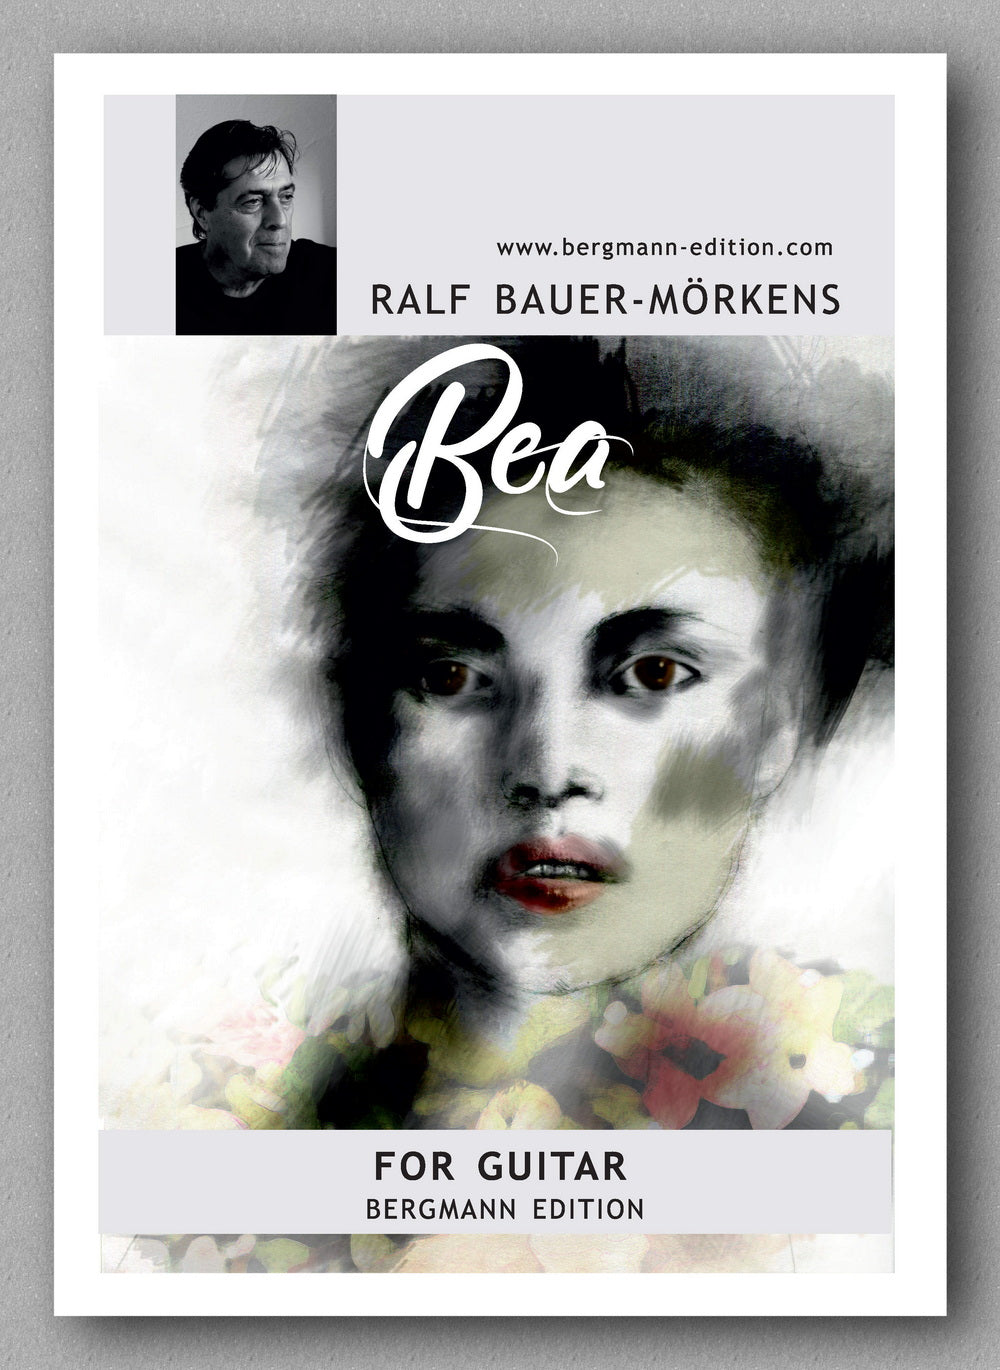 Ralf Bauer-Mörkens, Bea - preview of the cover